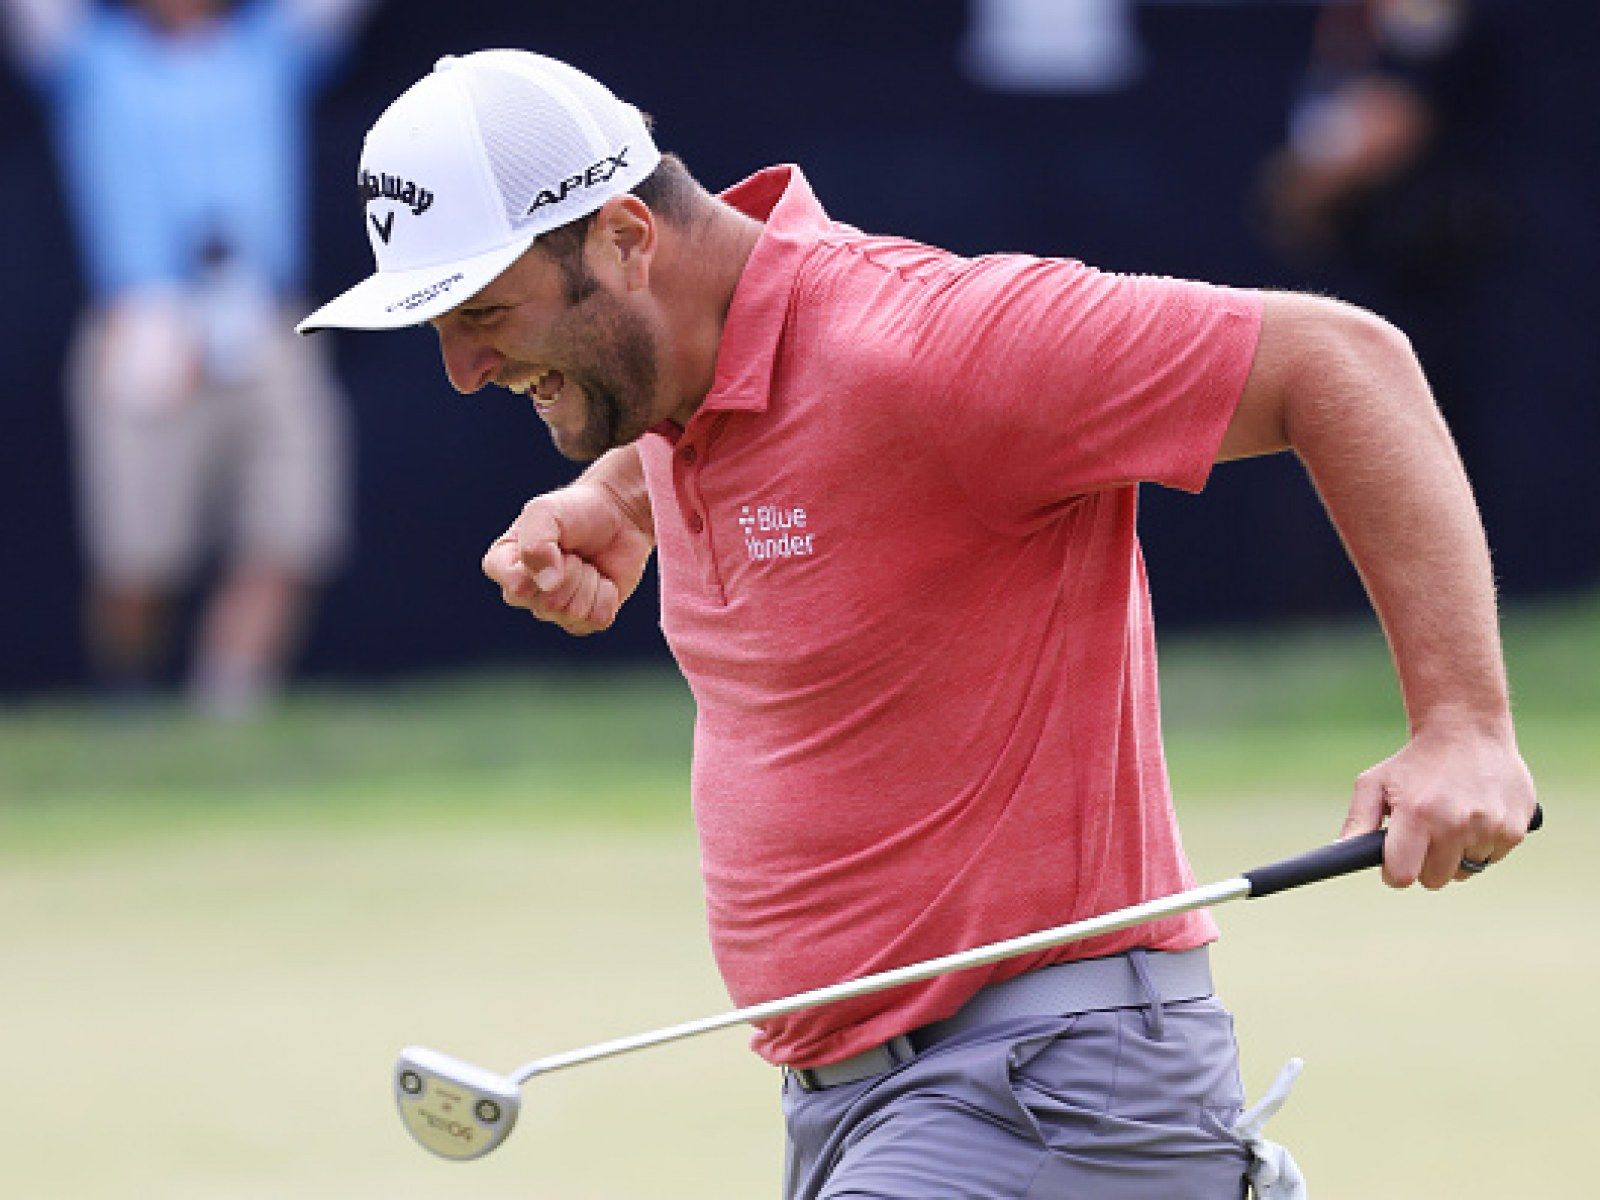 Jon Rahm Wins U.S. Open Two Weeks After Tournament Removal For COVID Tracing